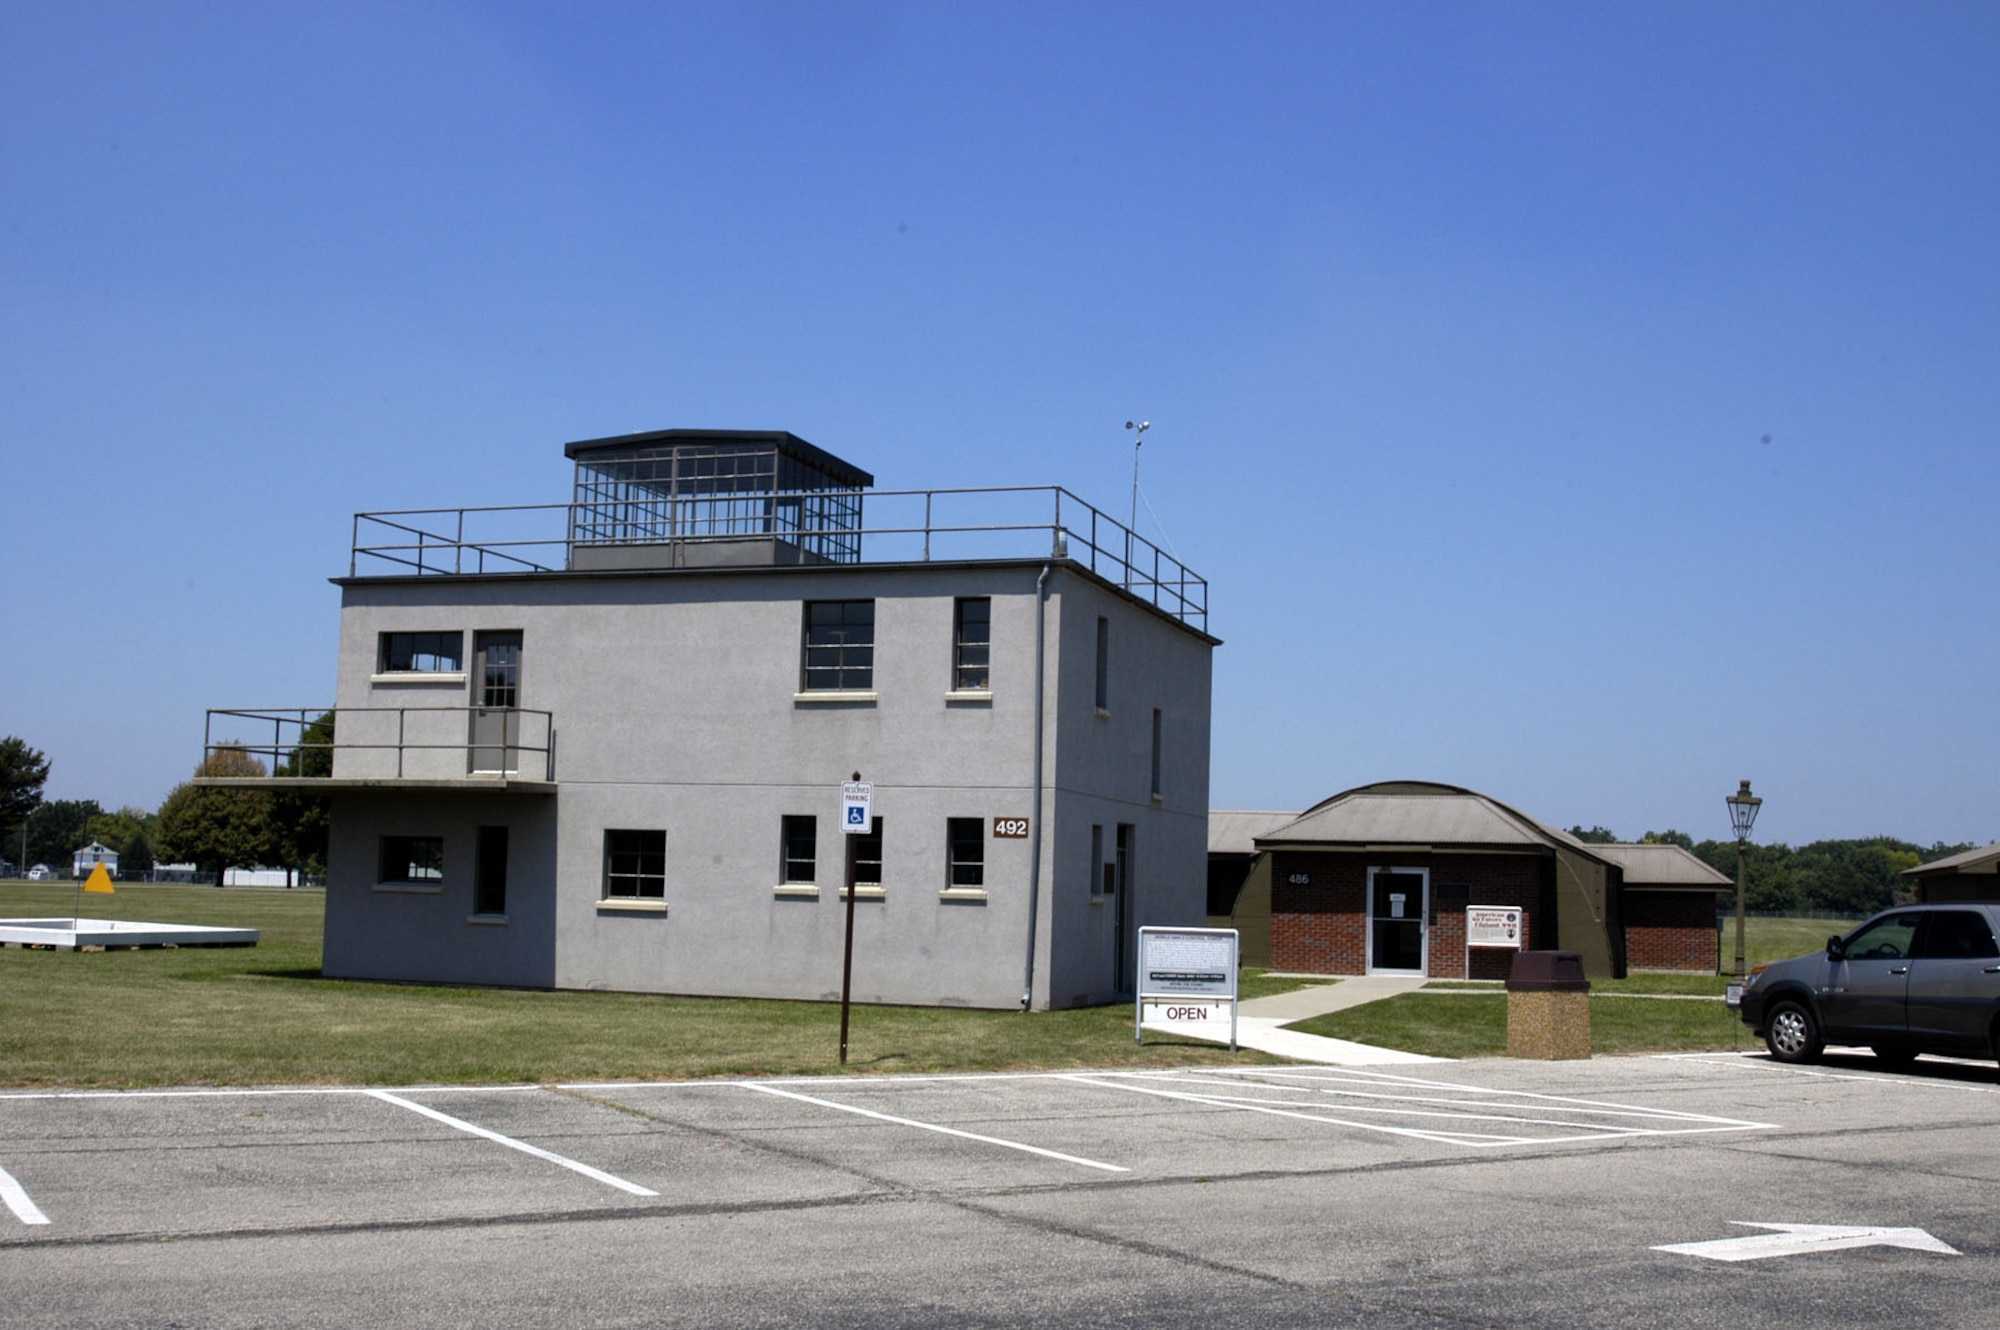 DAYTON, Ohio -- The 8th Air Force Control Tower is located on the grounds of the National Museum of the United States Air Force. (U.S. Air Force photo)